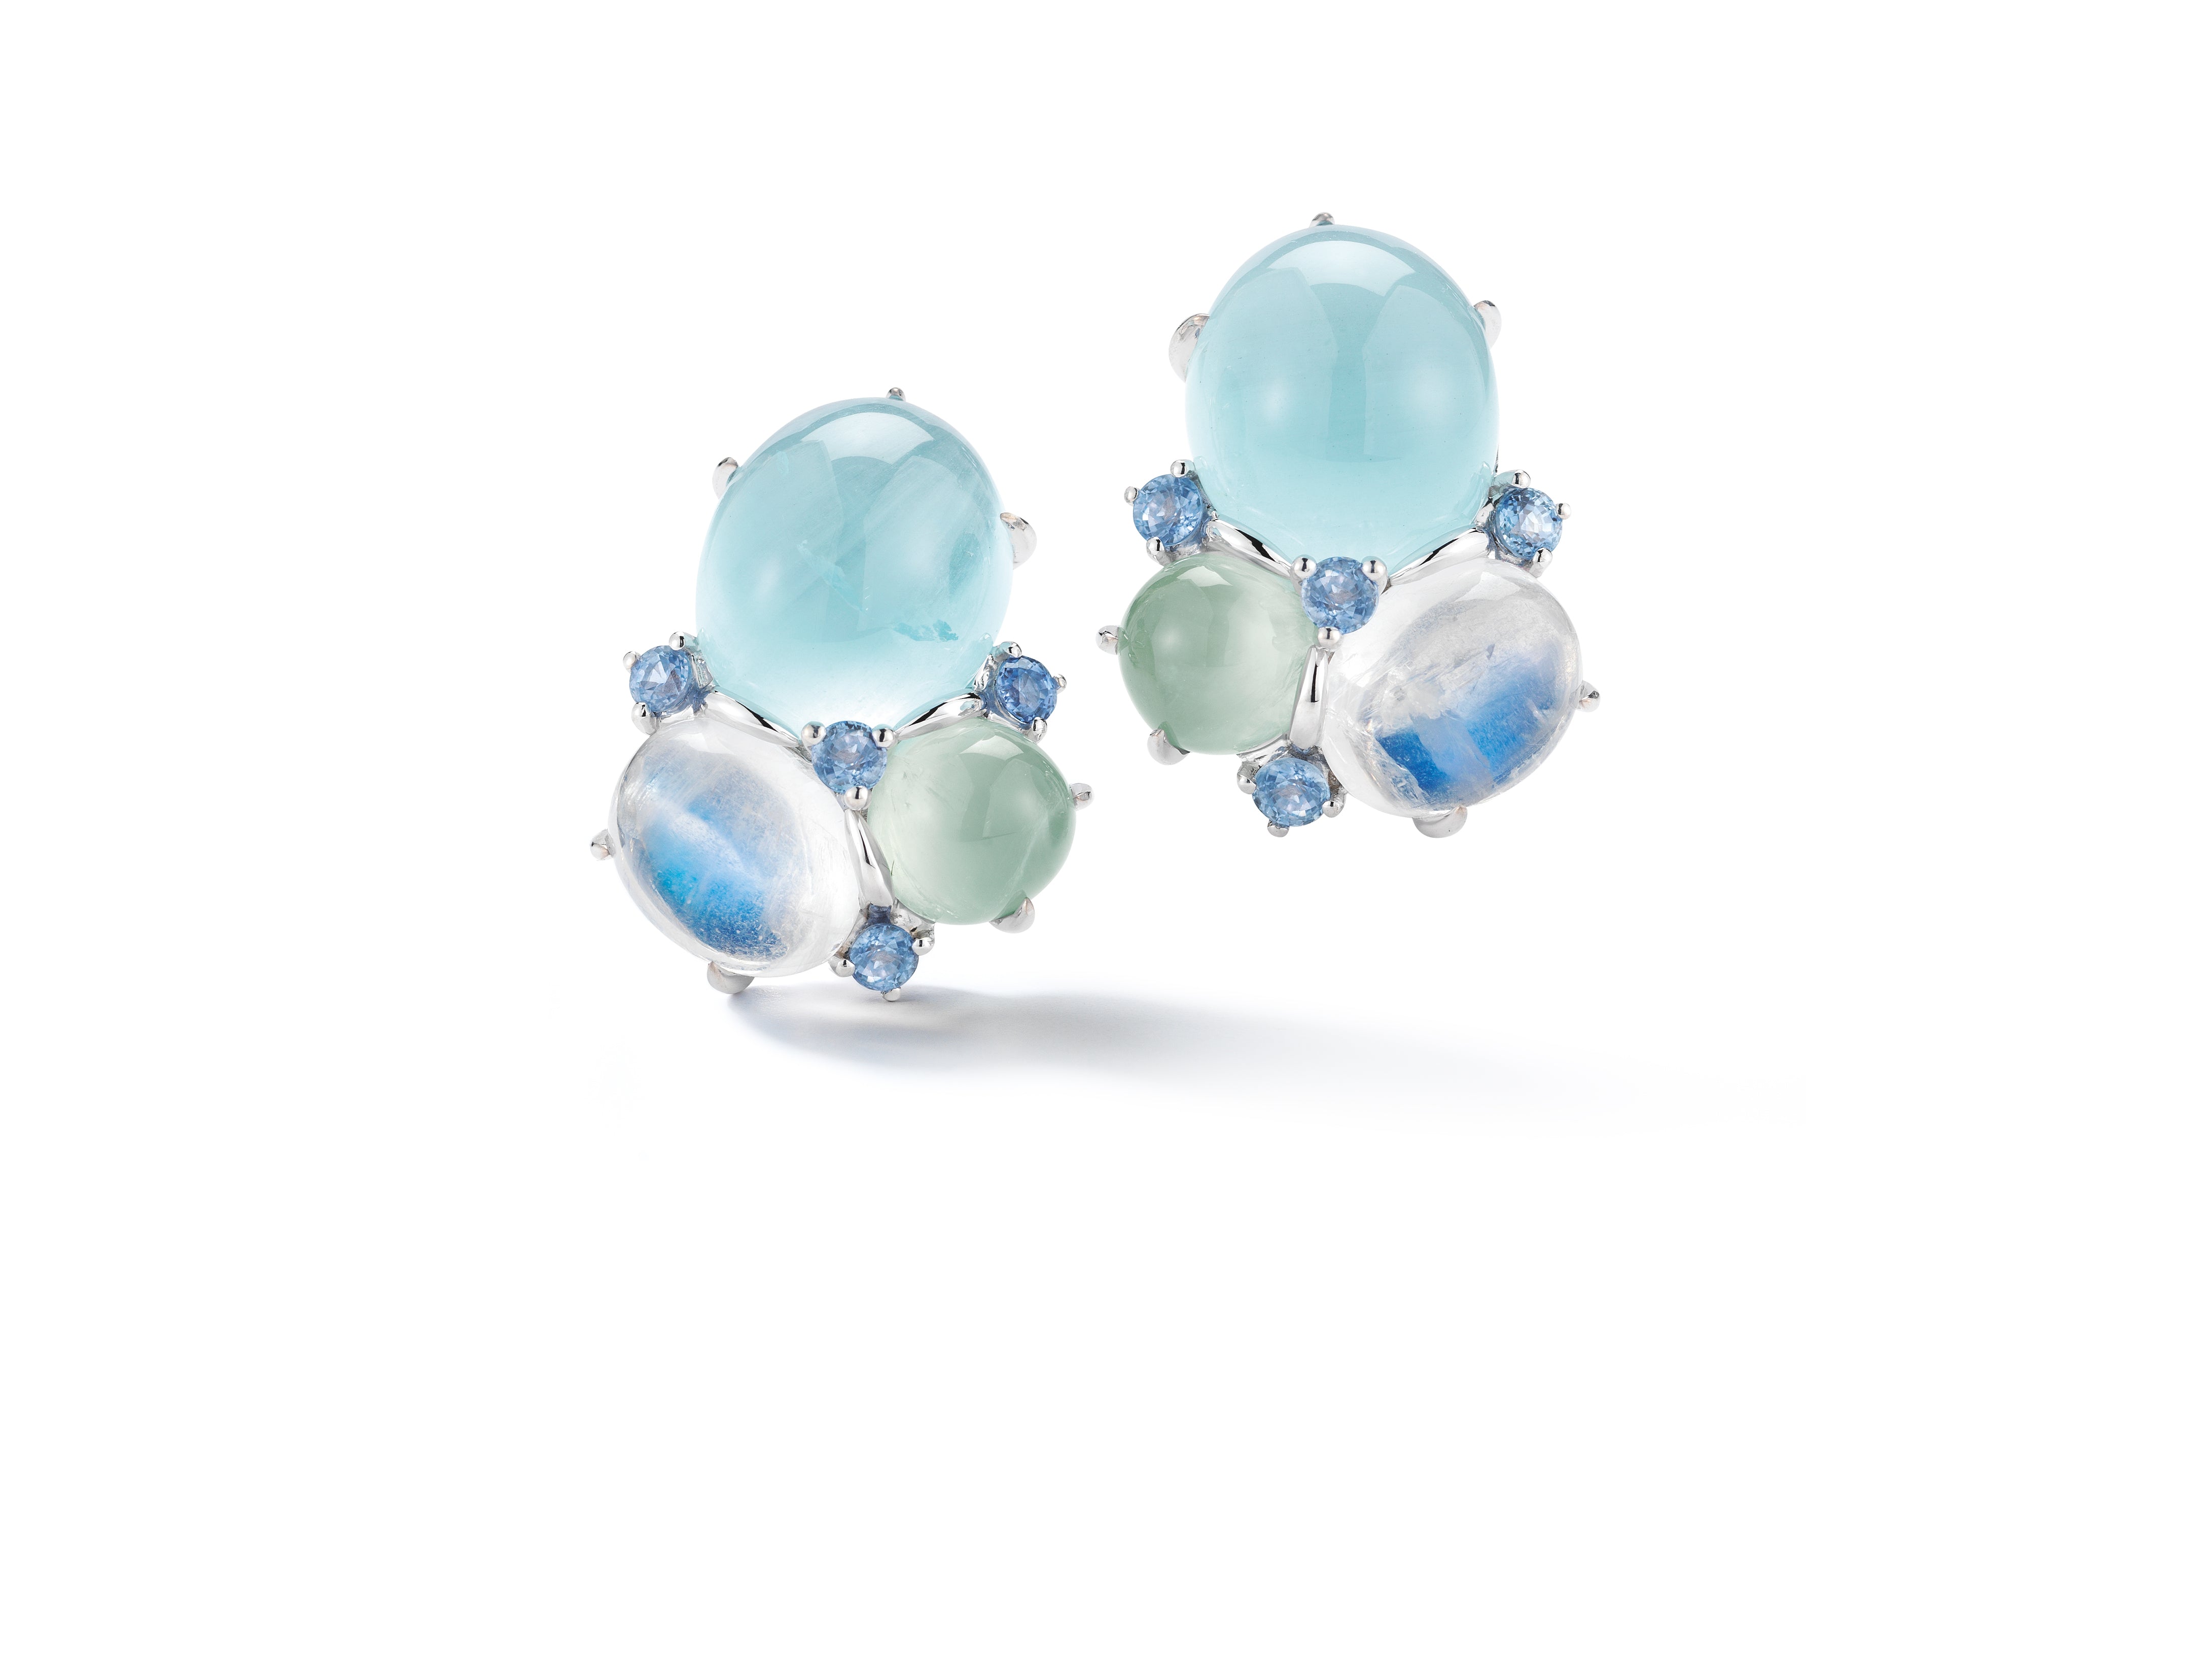 Three Cab Earrings in Blues & White Gold